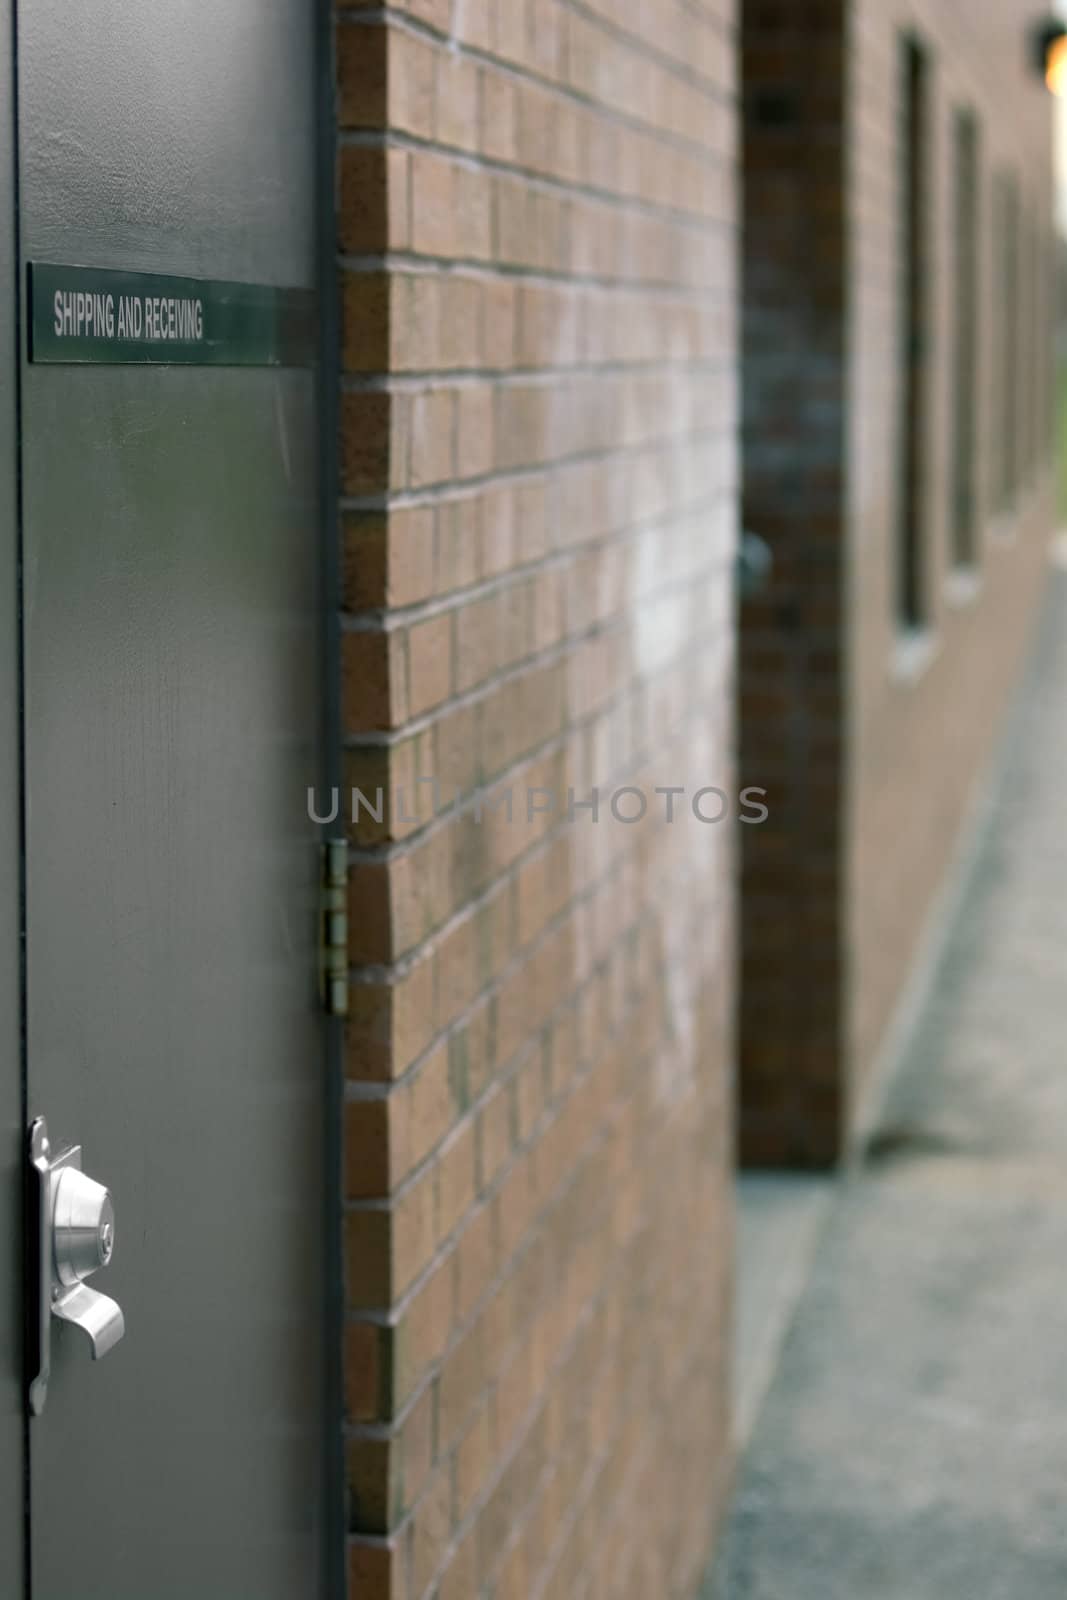 Shipping and Receiving door with nameplate & security lock in focus, the rest of the bricked building out of focus.